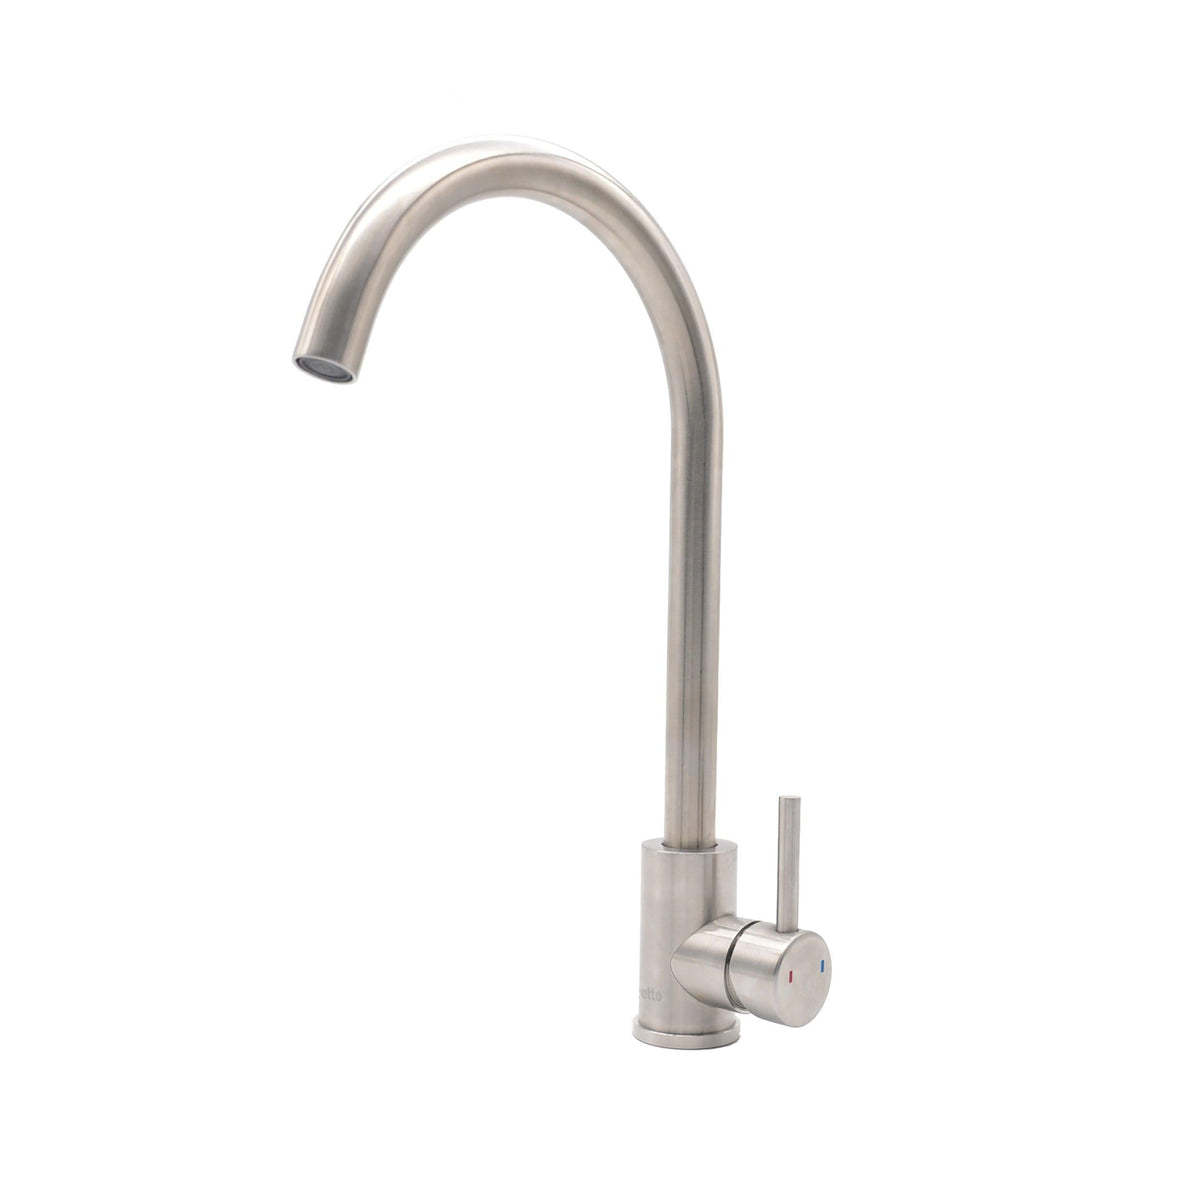 best stainless kitchen faucet